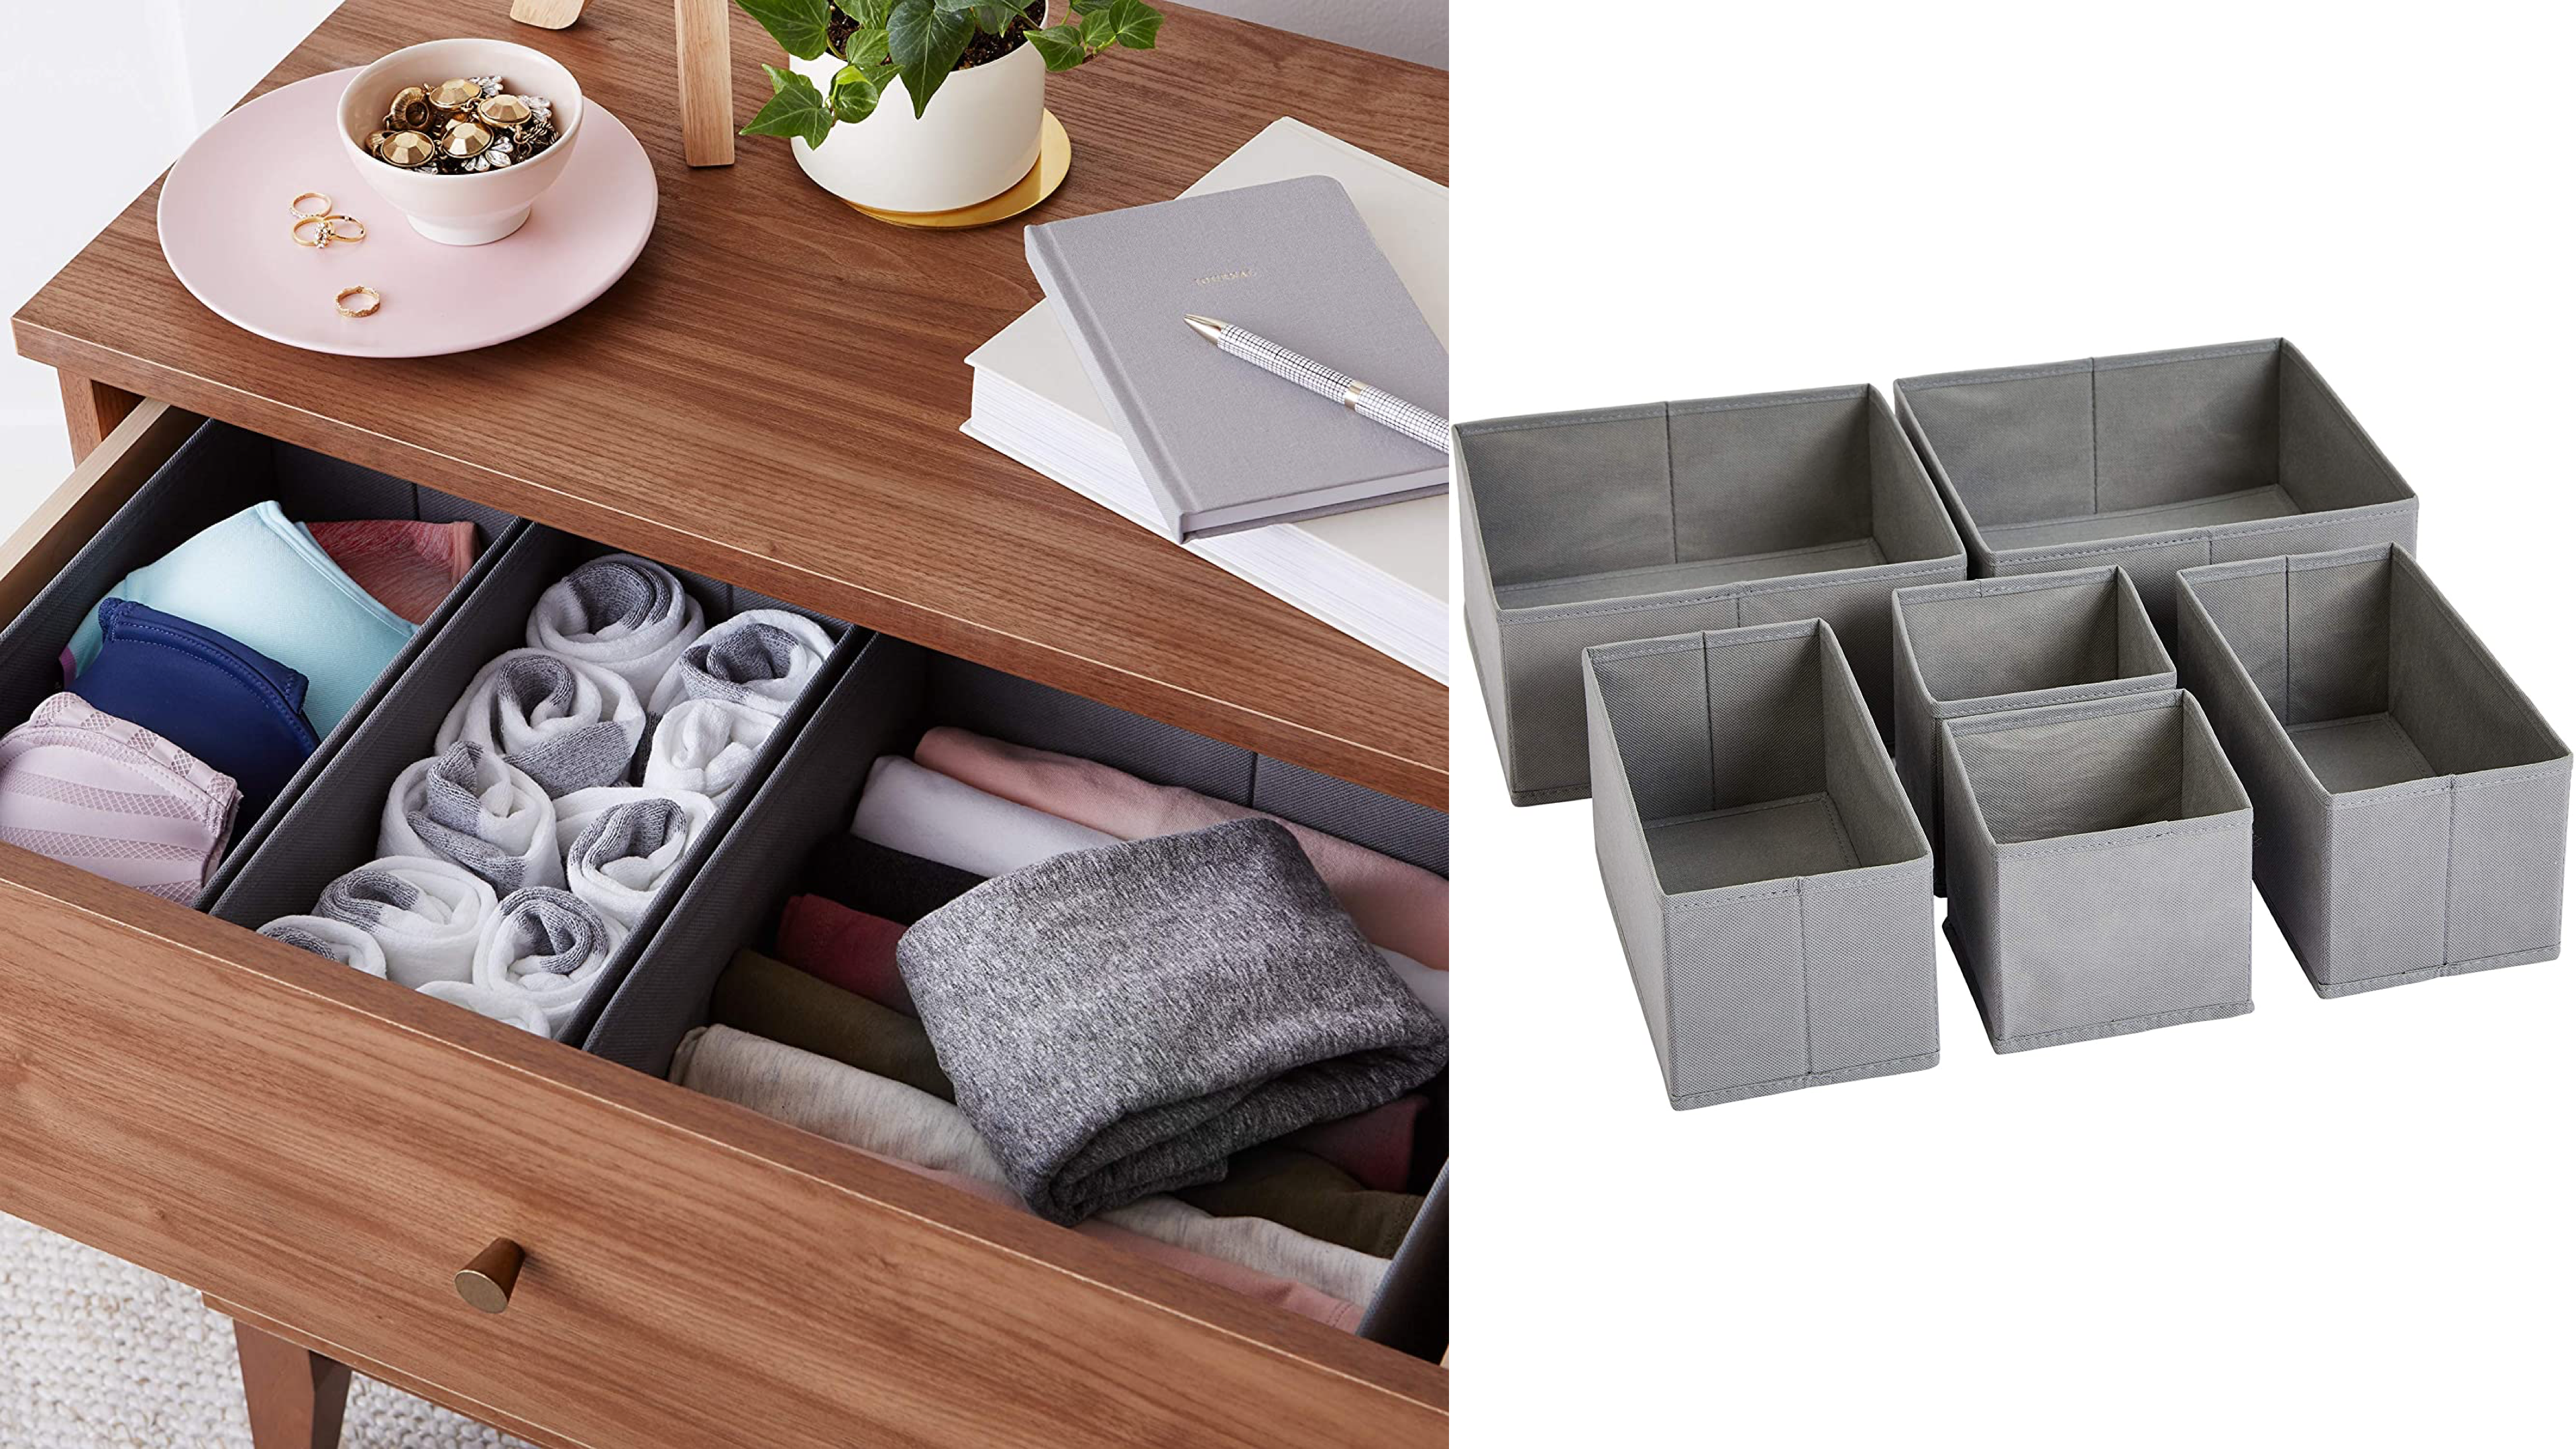 drawer-organizing bins to help with clutter